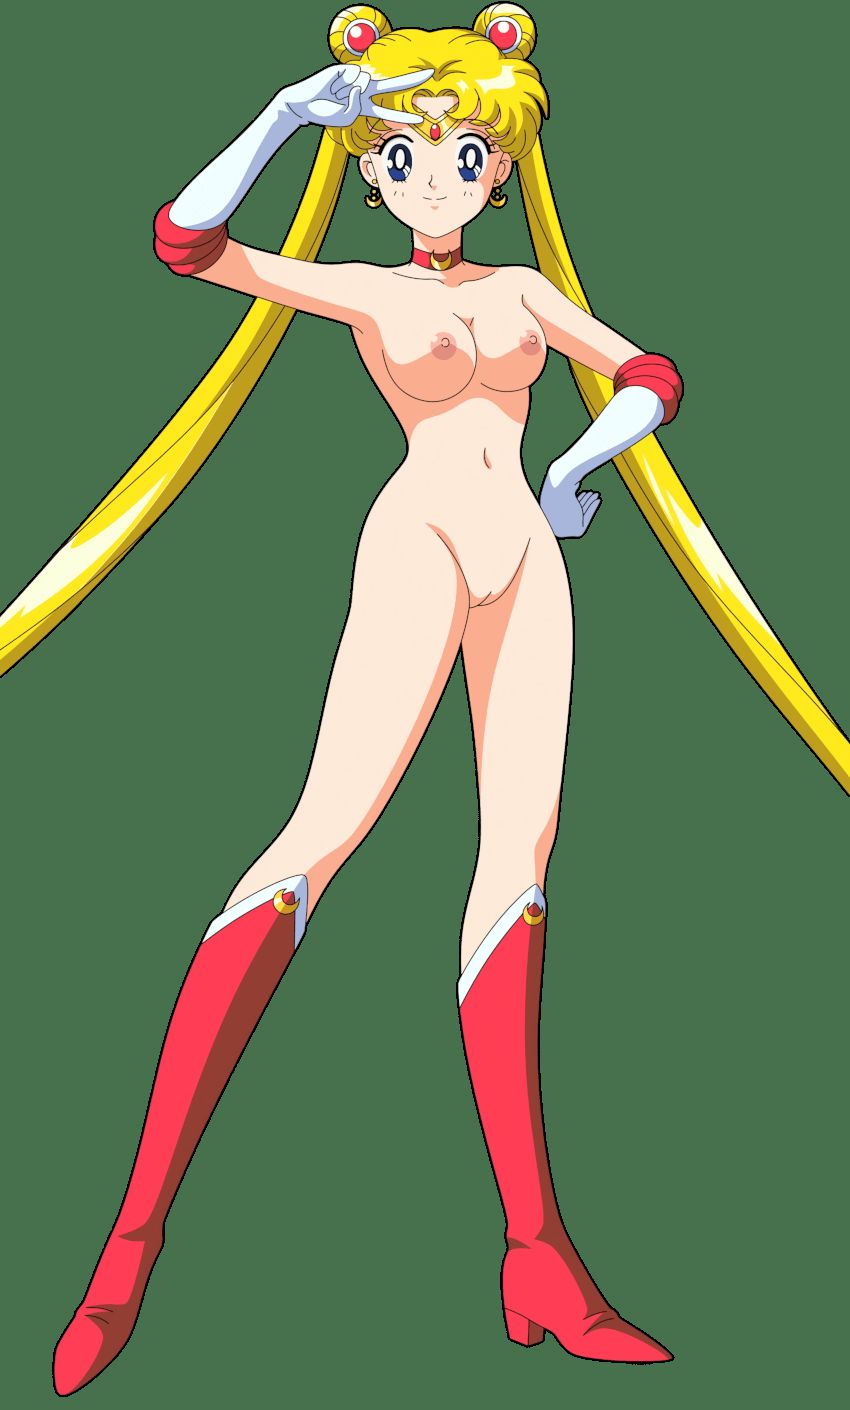 [Erocora character material] PNG background transparent erotic image such as anime character Part 422 34